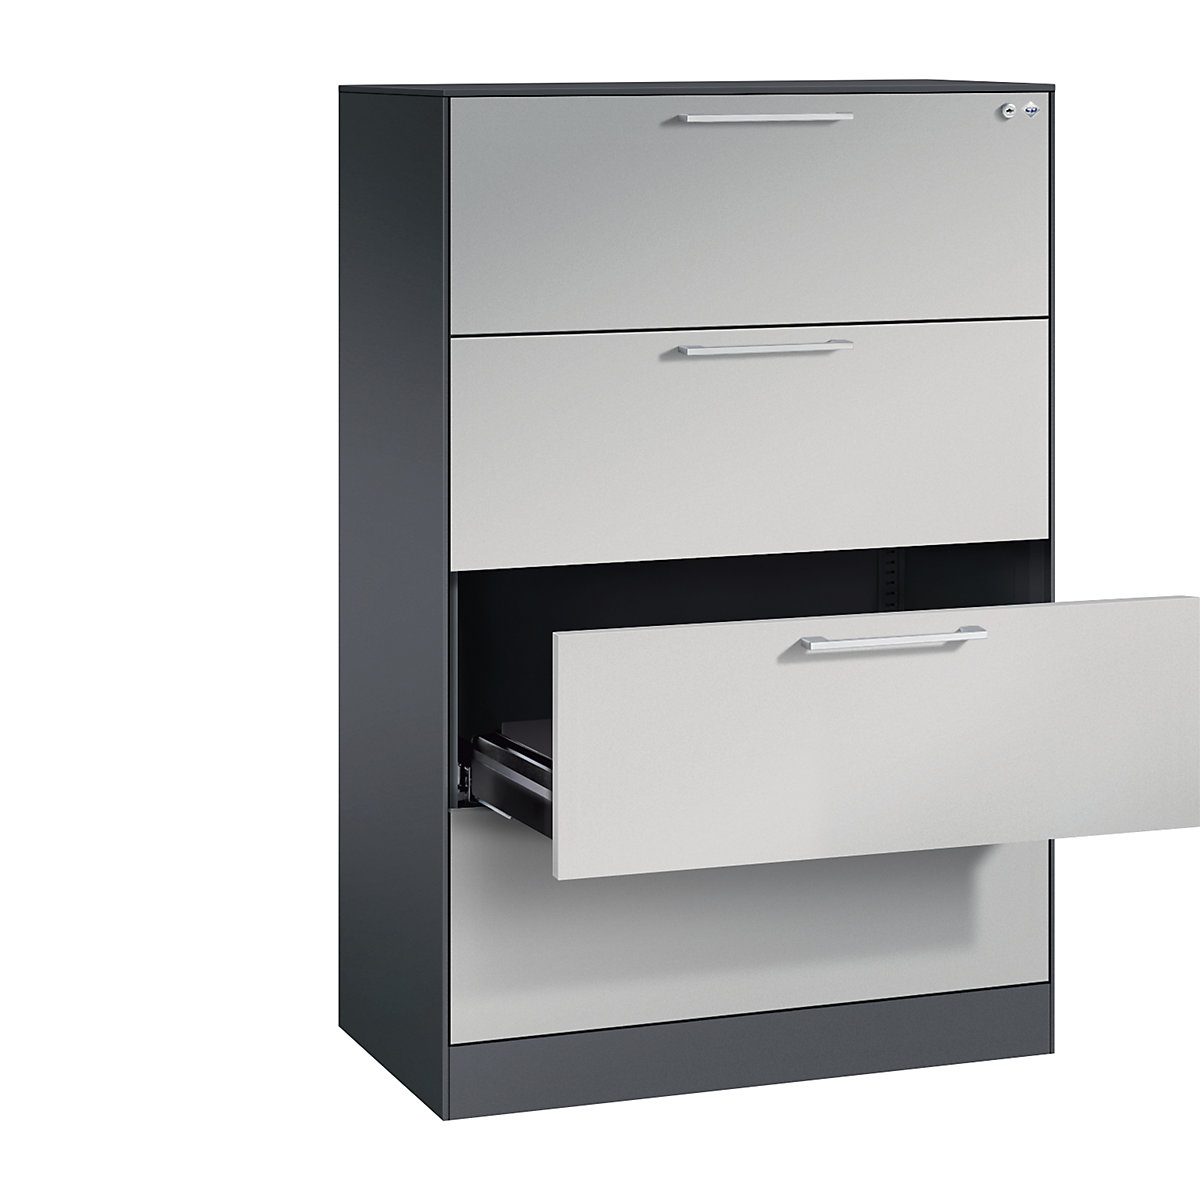 ASISTO card file cabinet – C+P, height 1292 mm, with 4 drawers, A4 landscape, black grey/white aluminium-16